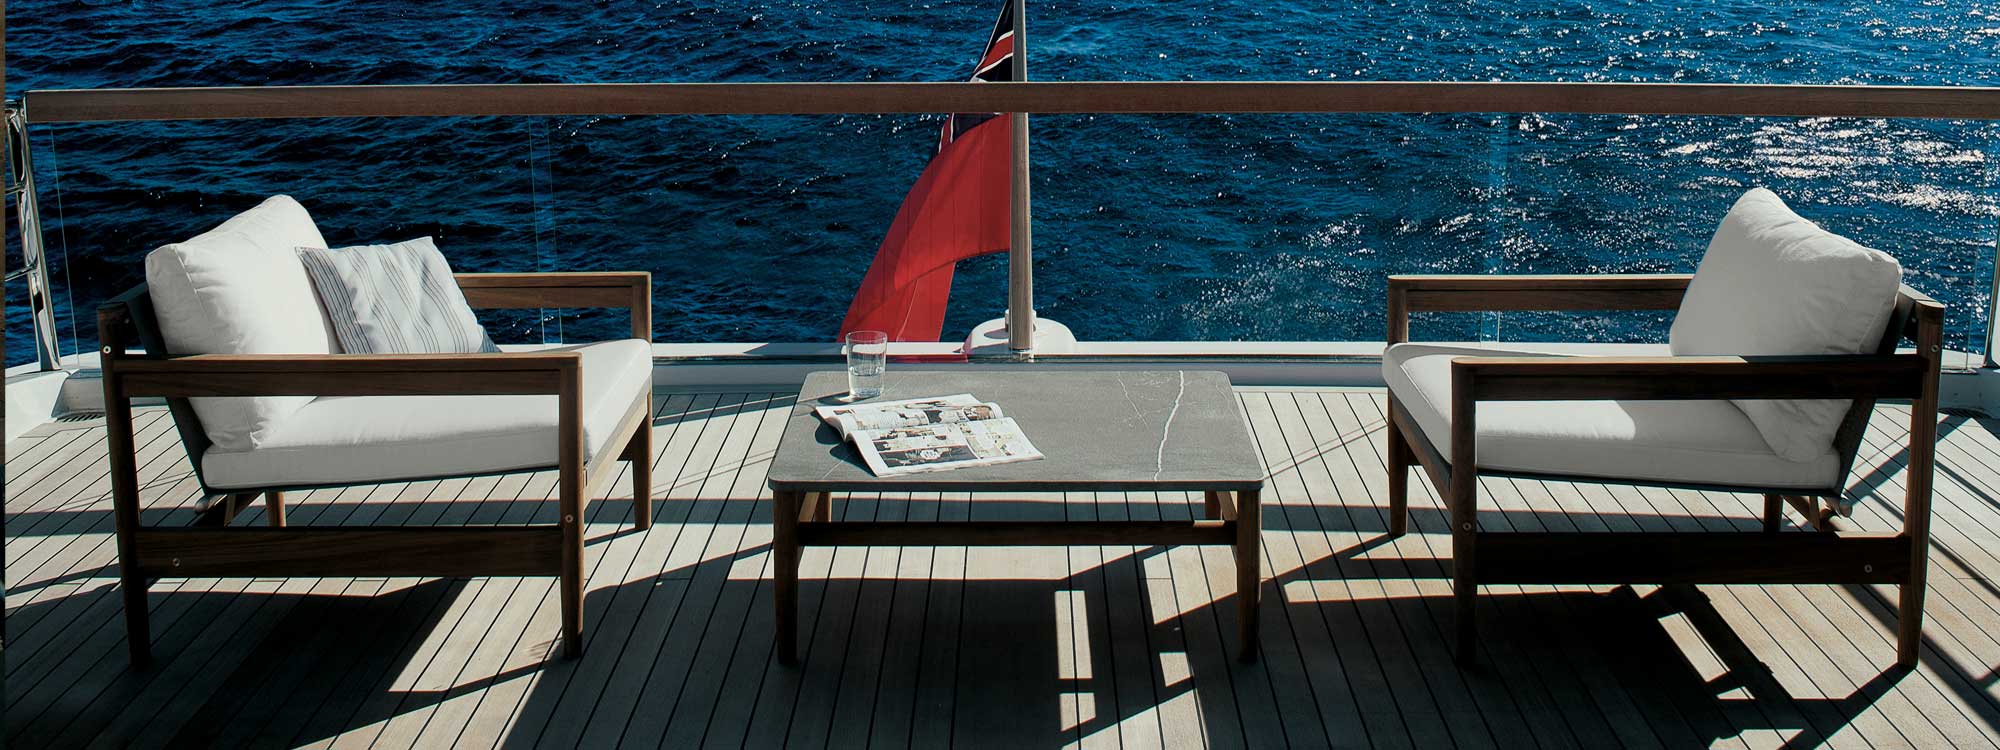 Image of teak aft deck of yacht with RODA Road teak lounge chairs and low table, with fluttering ensign flag and sea in the background